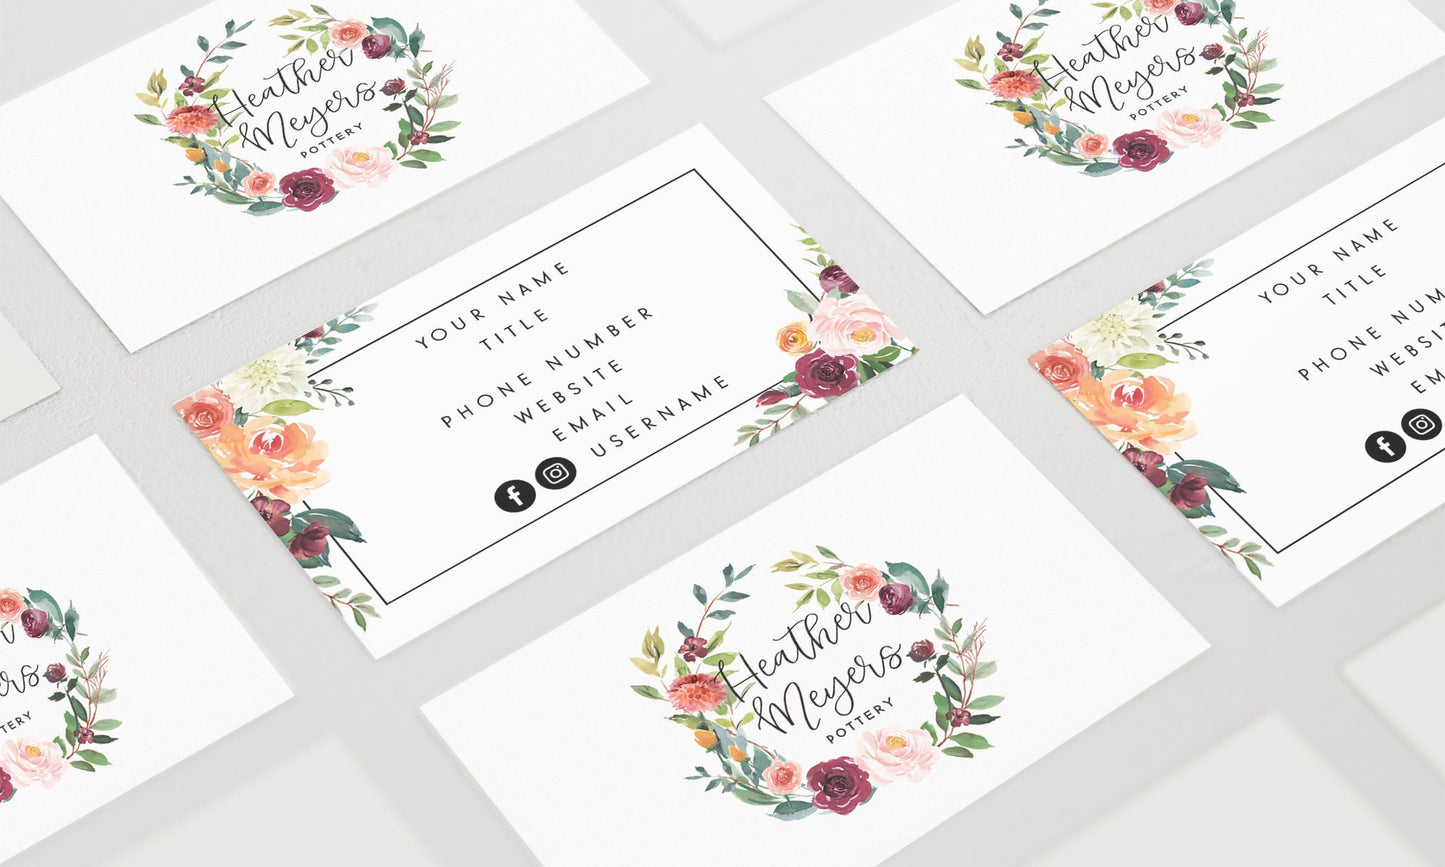 Heather Meyers | Premade Business Card Design | Floral Wreath, Autumn, Roses